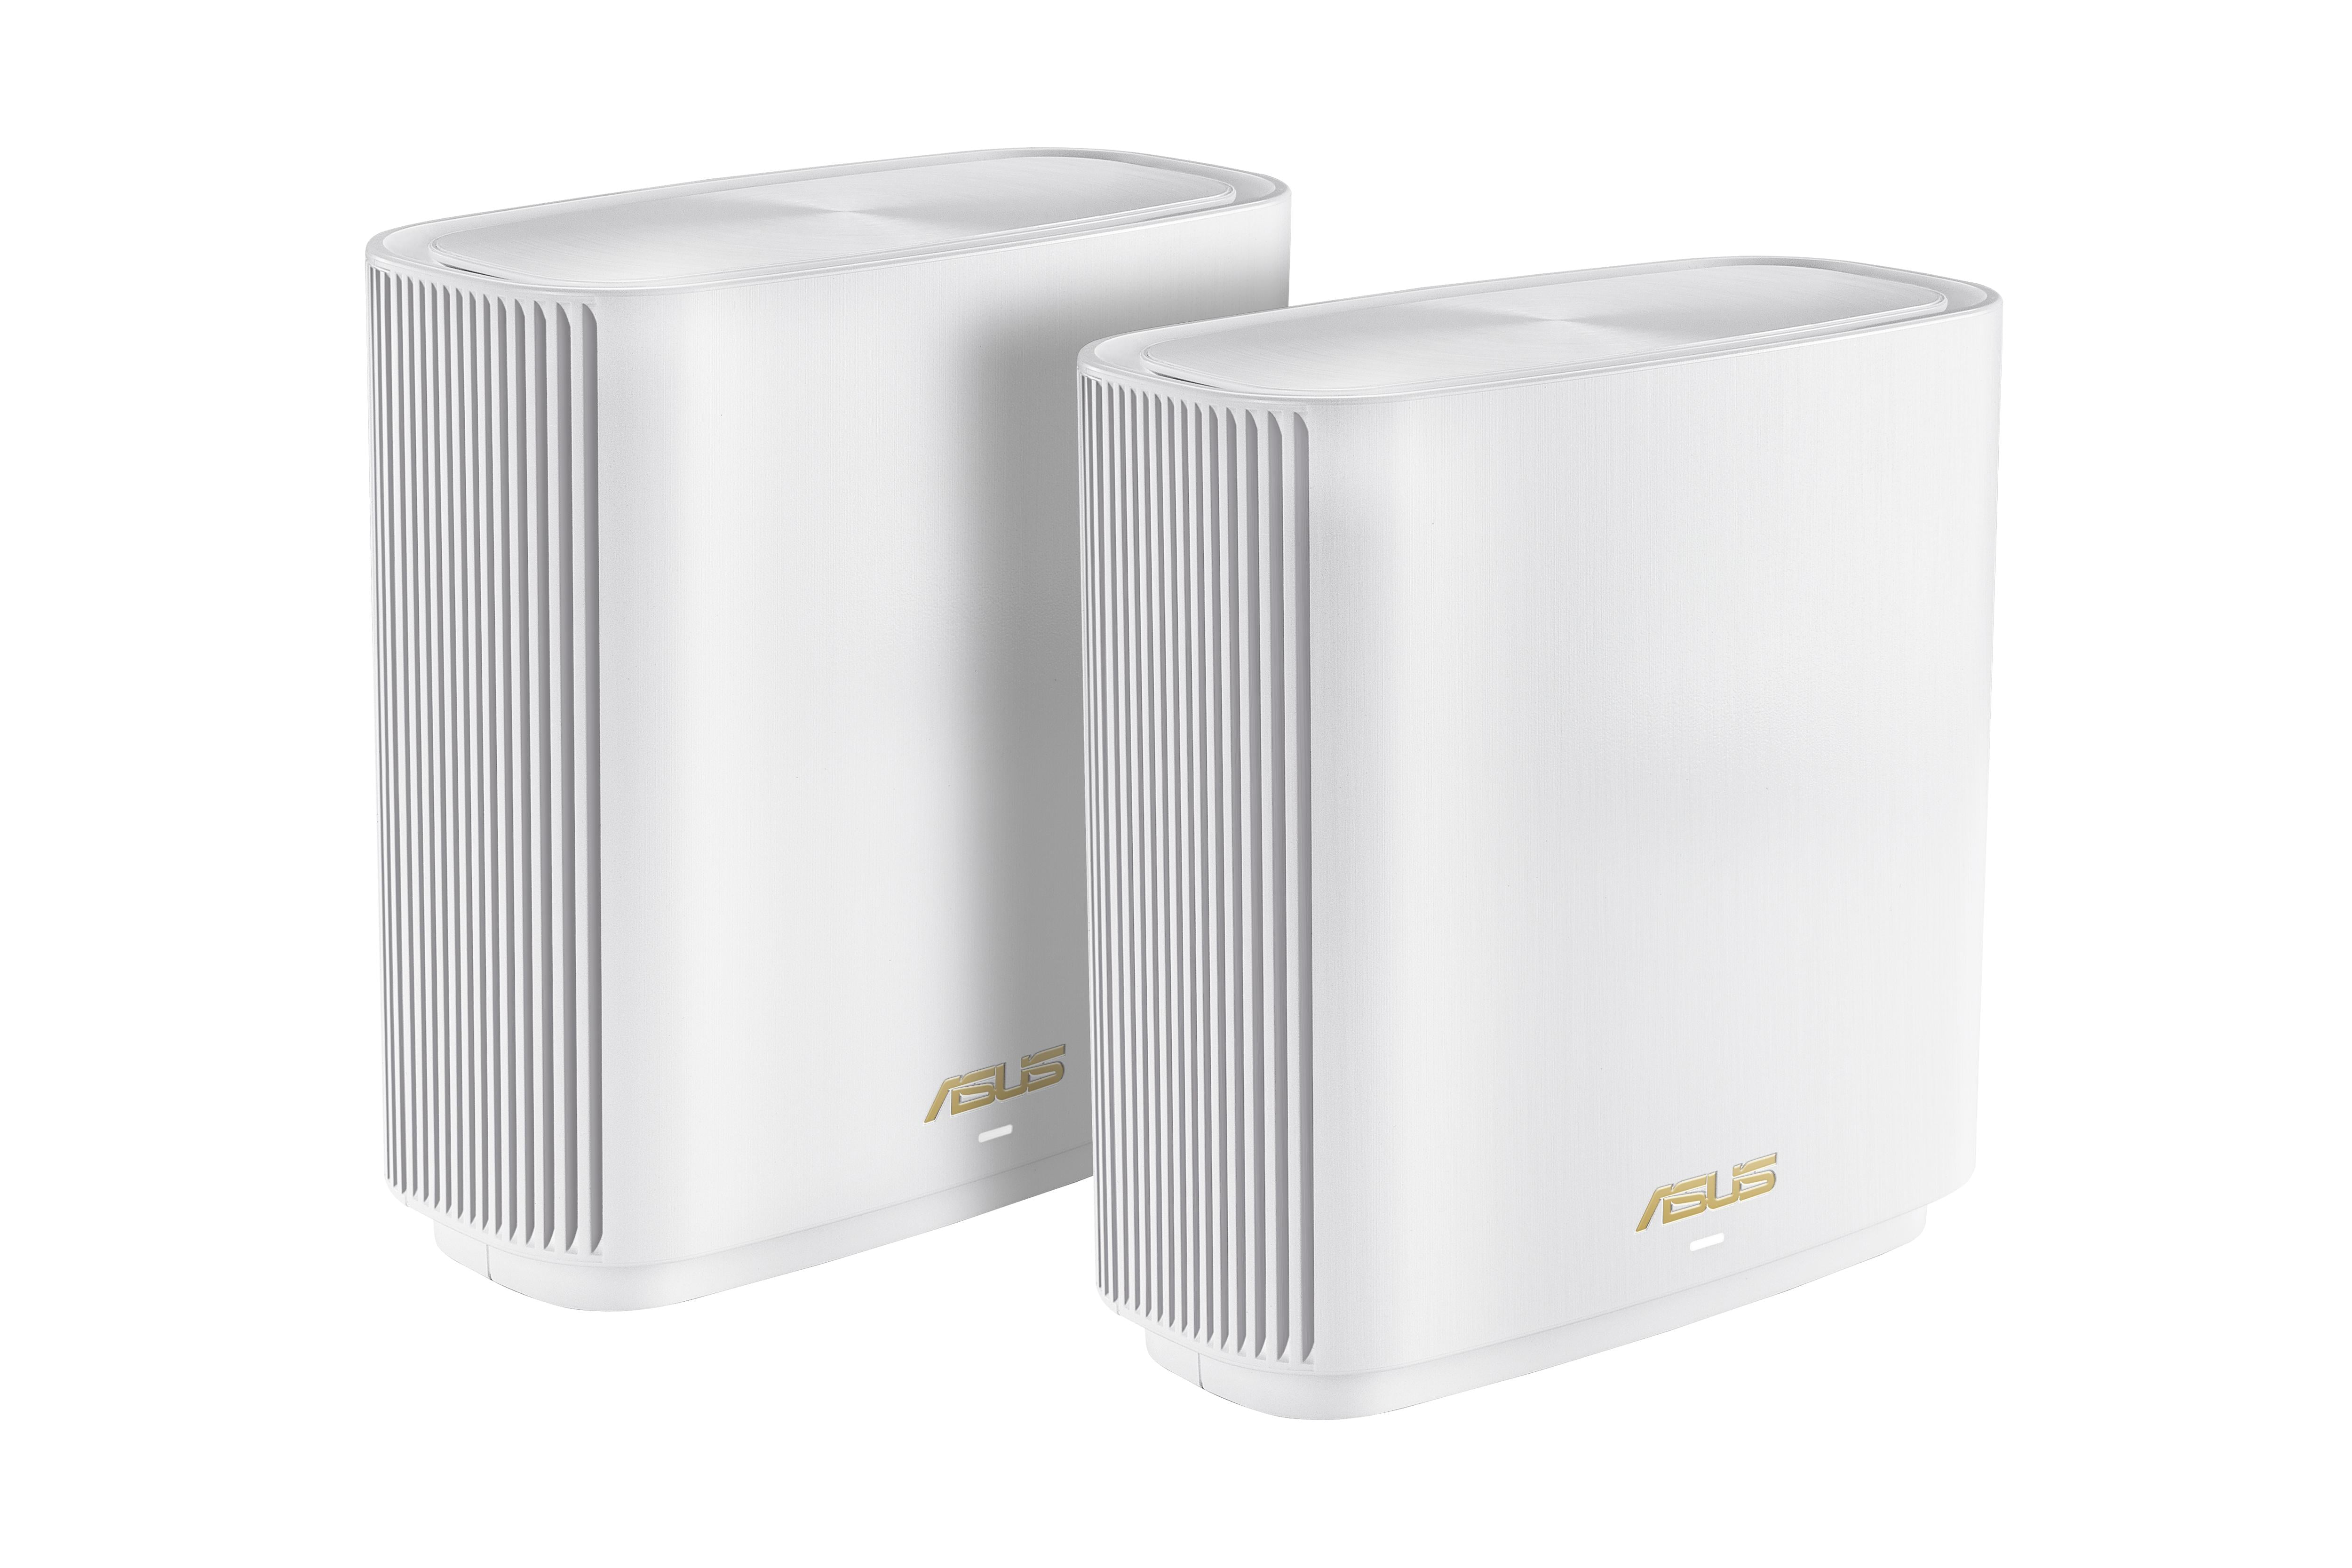 ASUS ZenWiFi AX Whole-Home Tri-band Mesh WiFi 6 System (XT8-WHITE)-2 pack,  Coverage up to 5,500 sq.ft/6+rooms, 6.6Gbps, 3 SSIDs, life-time free 